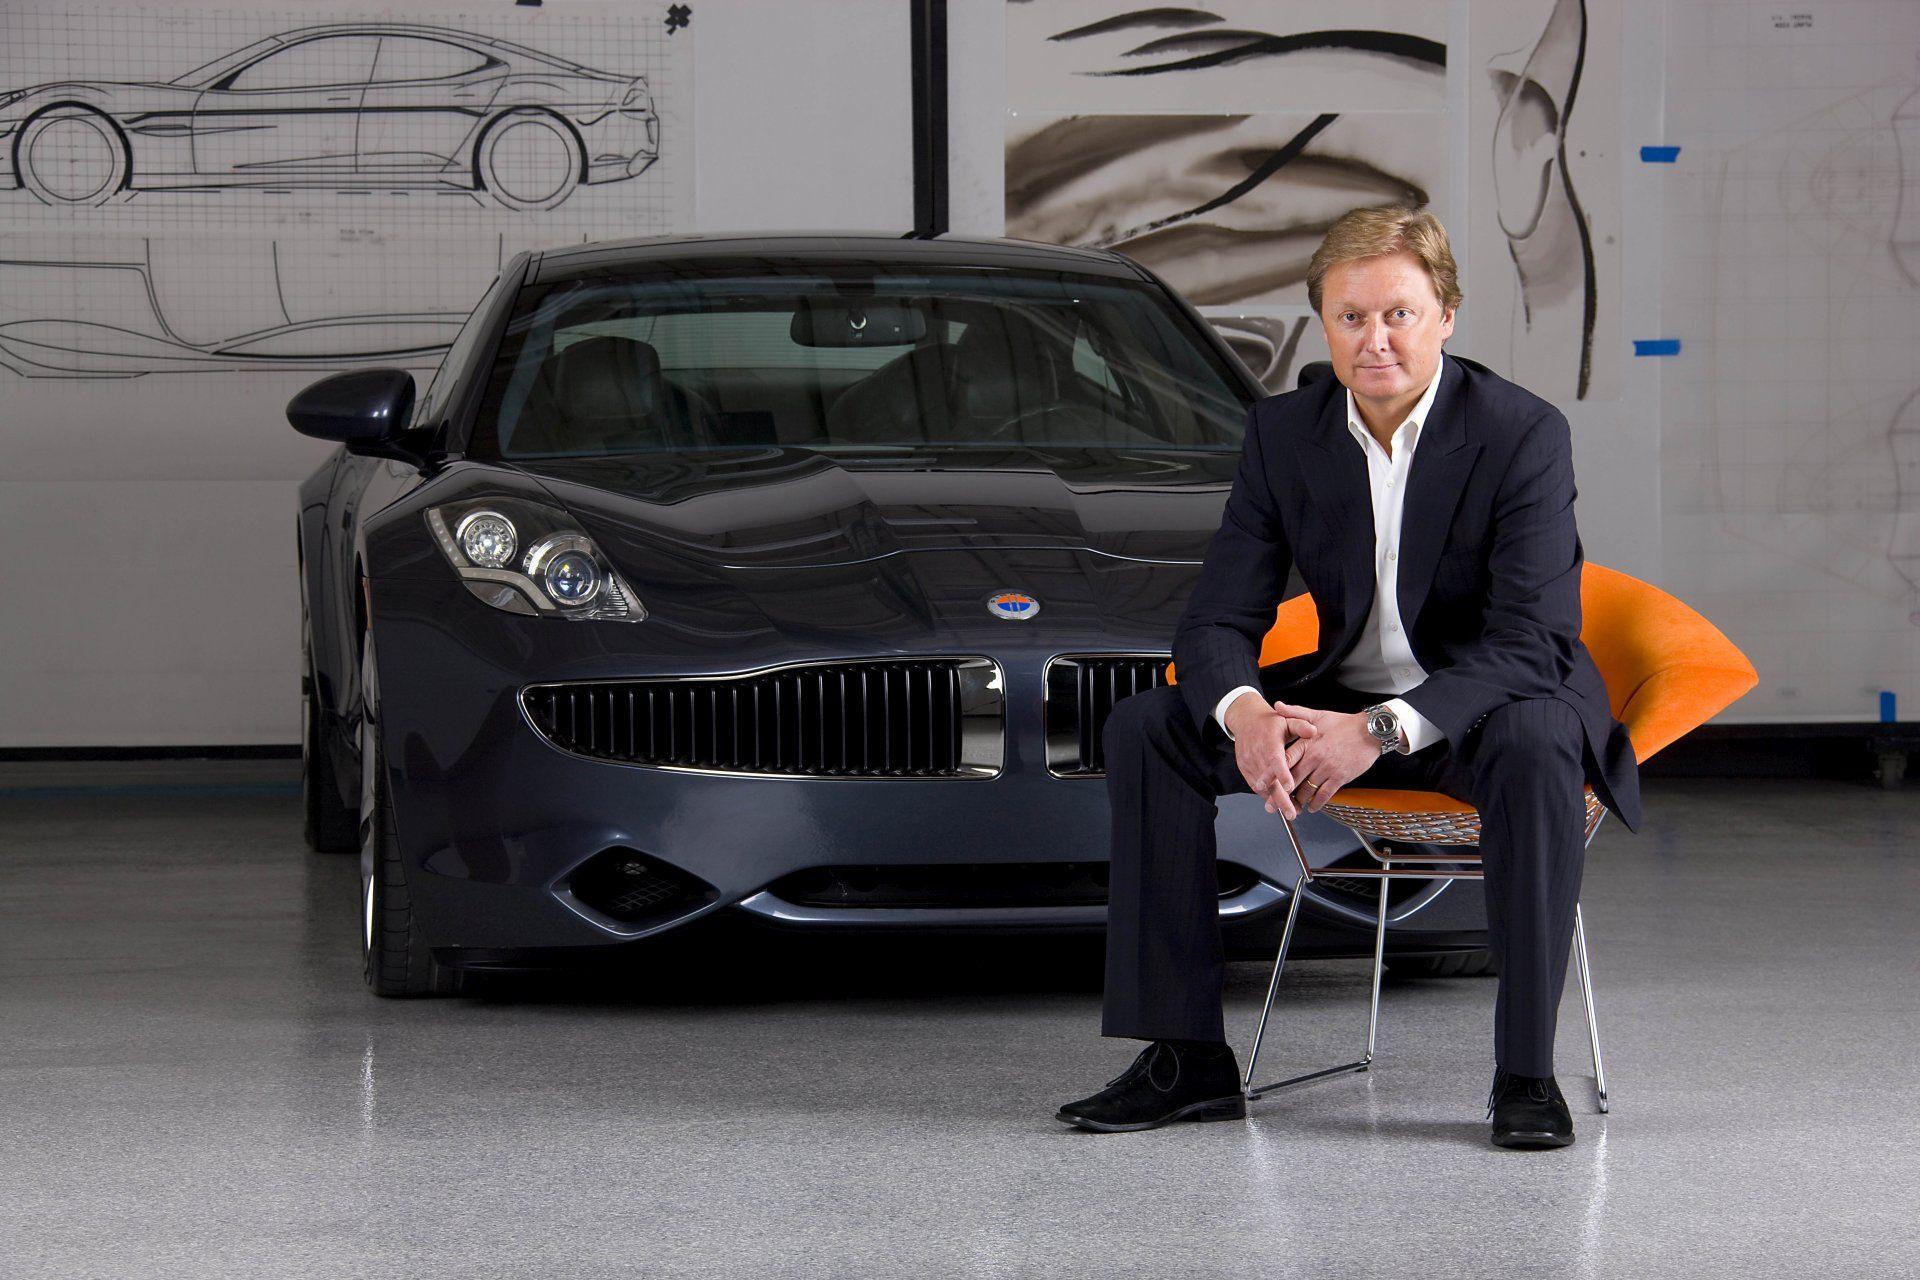 Fisker Car Company Logo - Henrik Fisker Launches Electric Car Remake Competing With Wanxiang ...